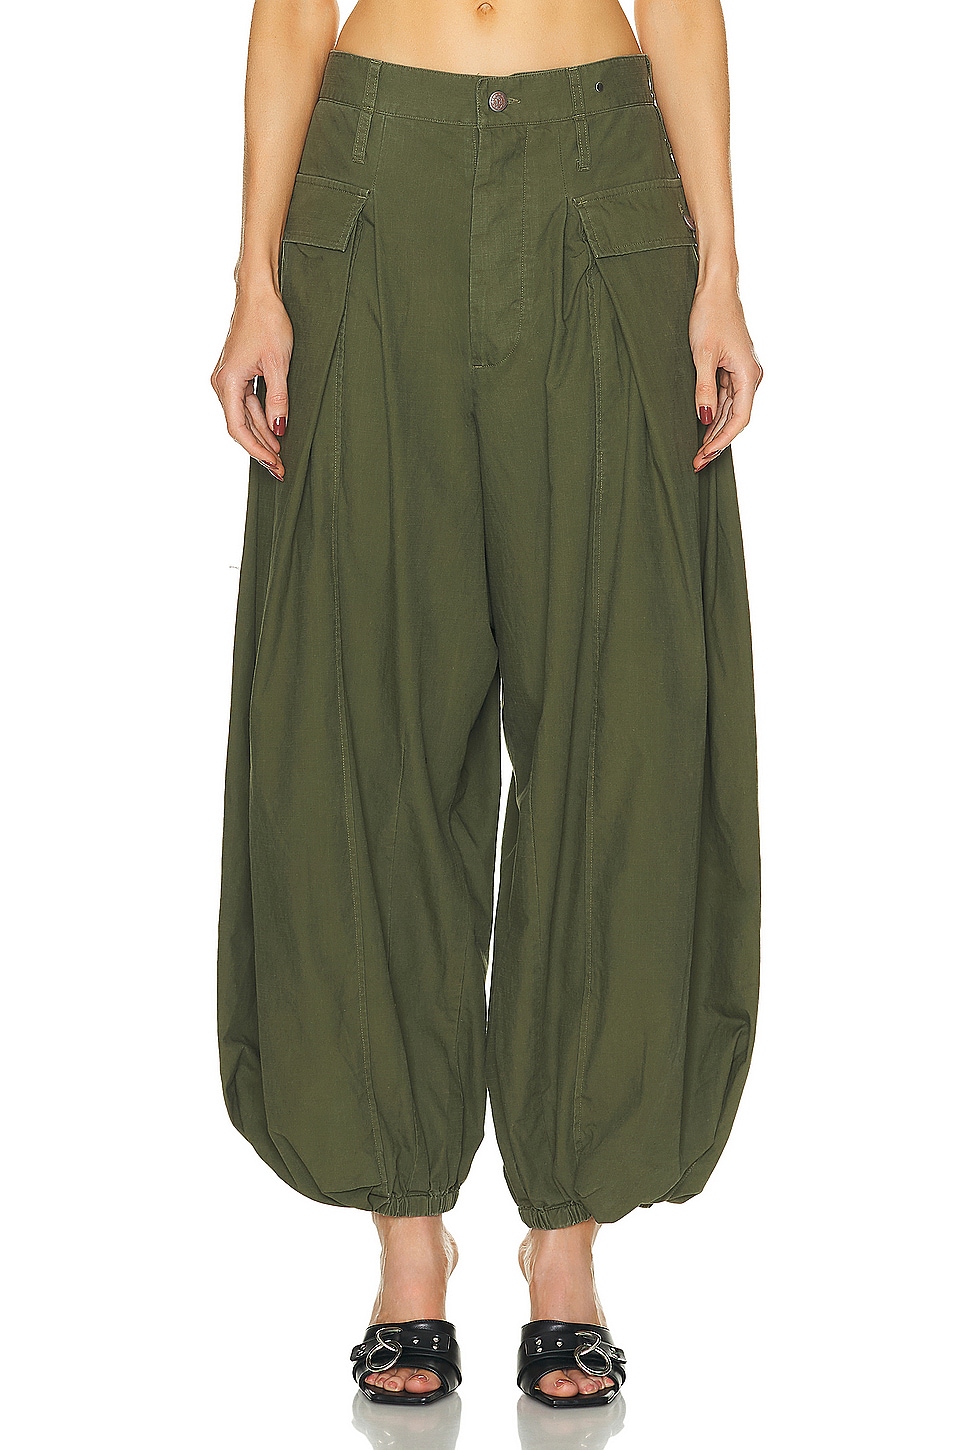 Image 1 of R13 Jesse Army Pant in Olive